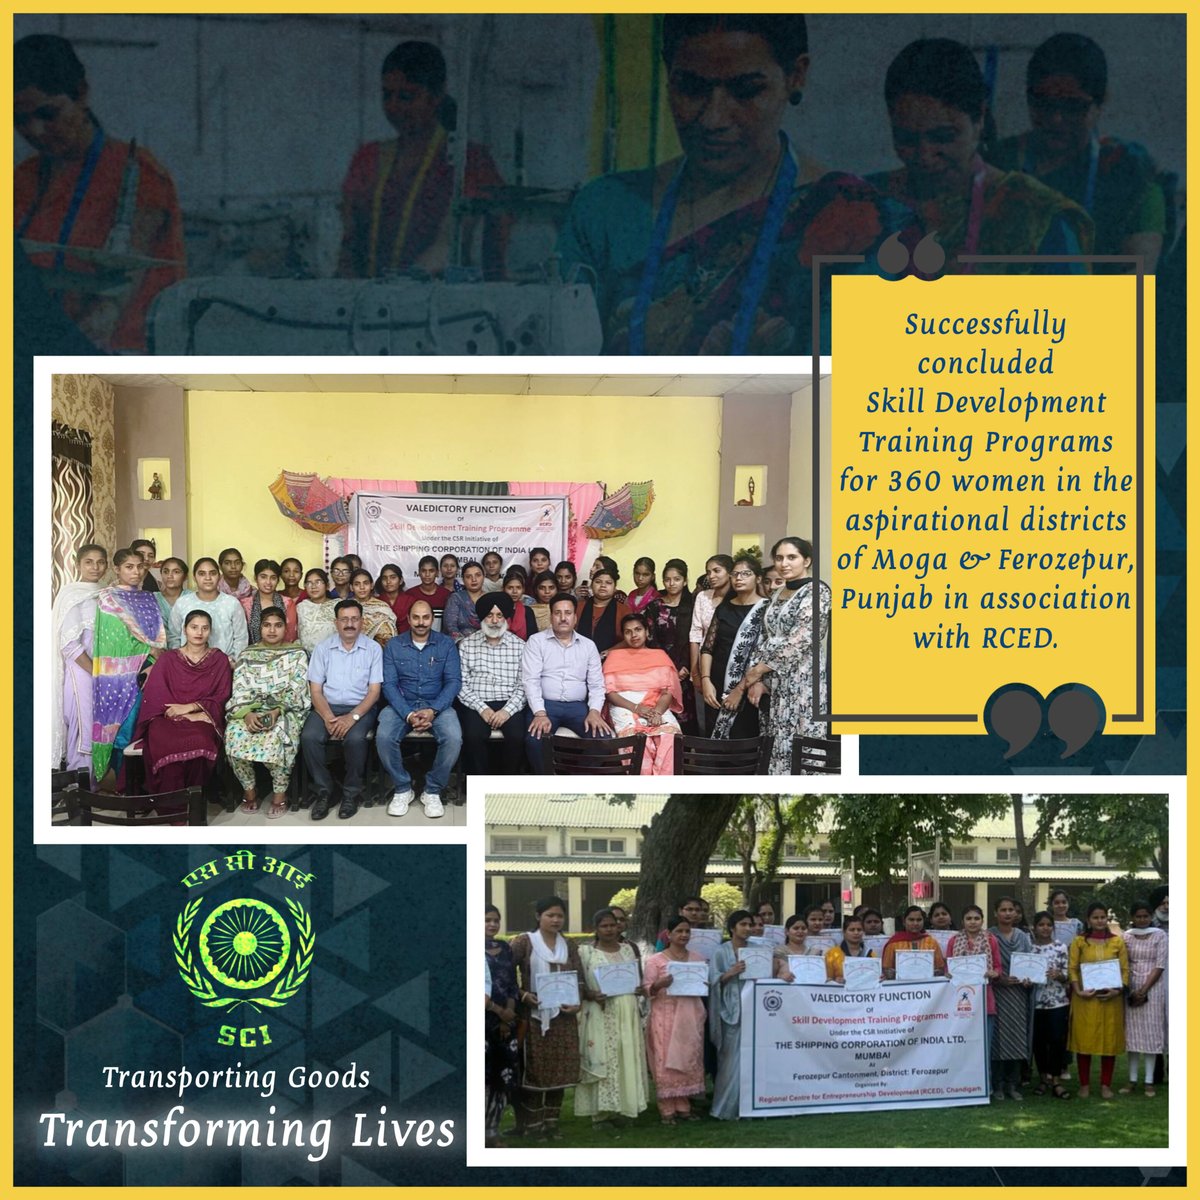 Living to our philosophy of #TransformingLives, @shippingcorp under its CSR initiative, successfully conducted Skill Development Training for Women in aspirational districts of Punjab, empowering them as individuals, capable of earning their livelihood @shipmin_india @MinistryWCD